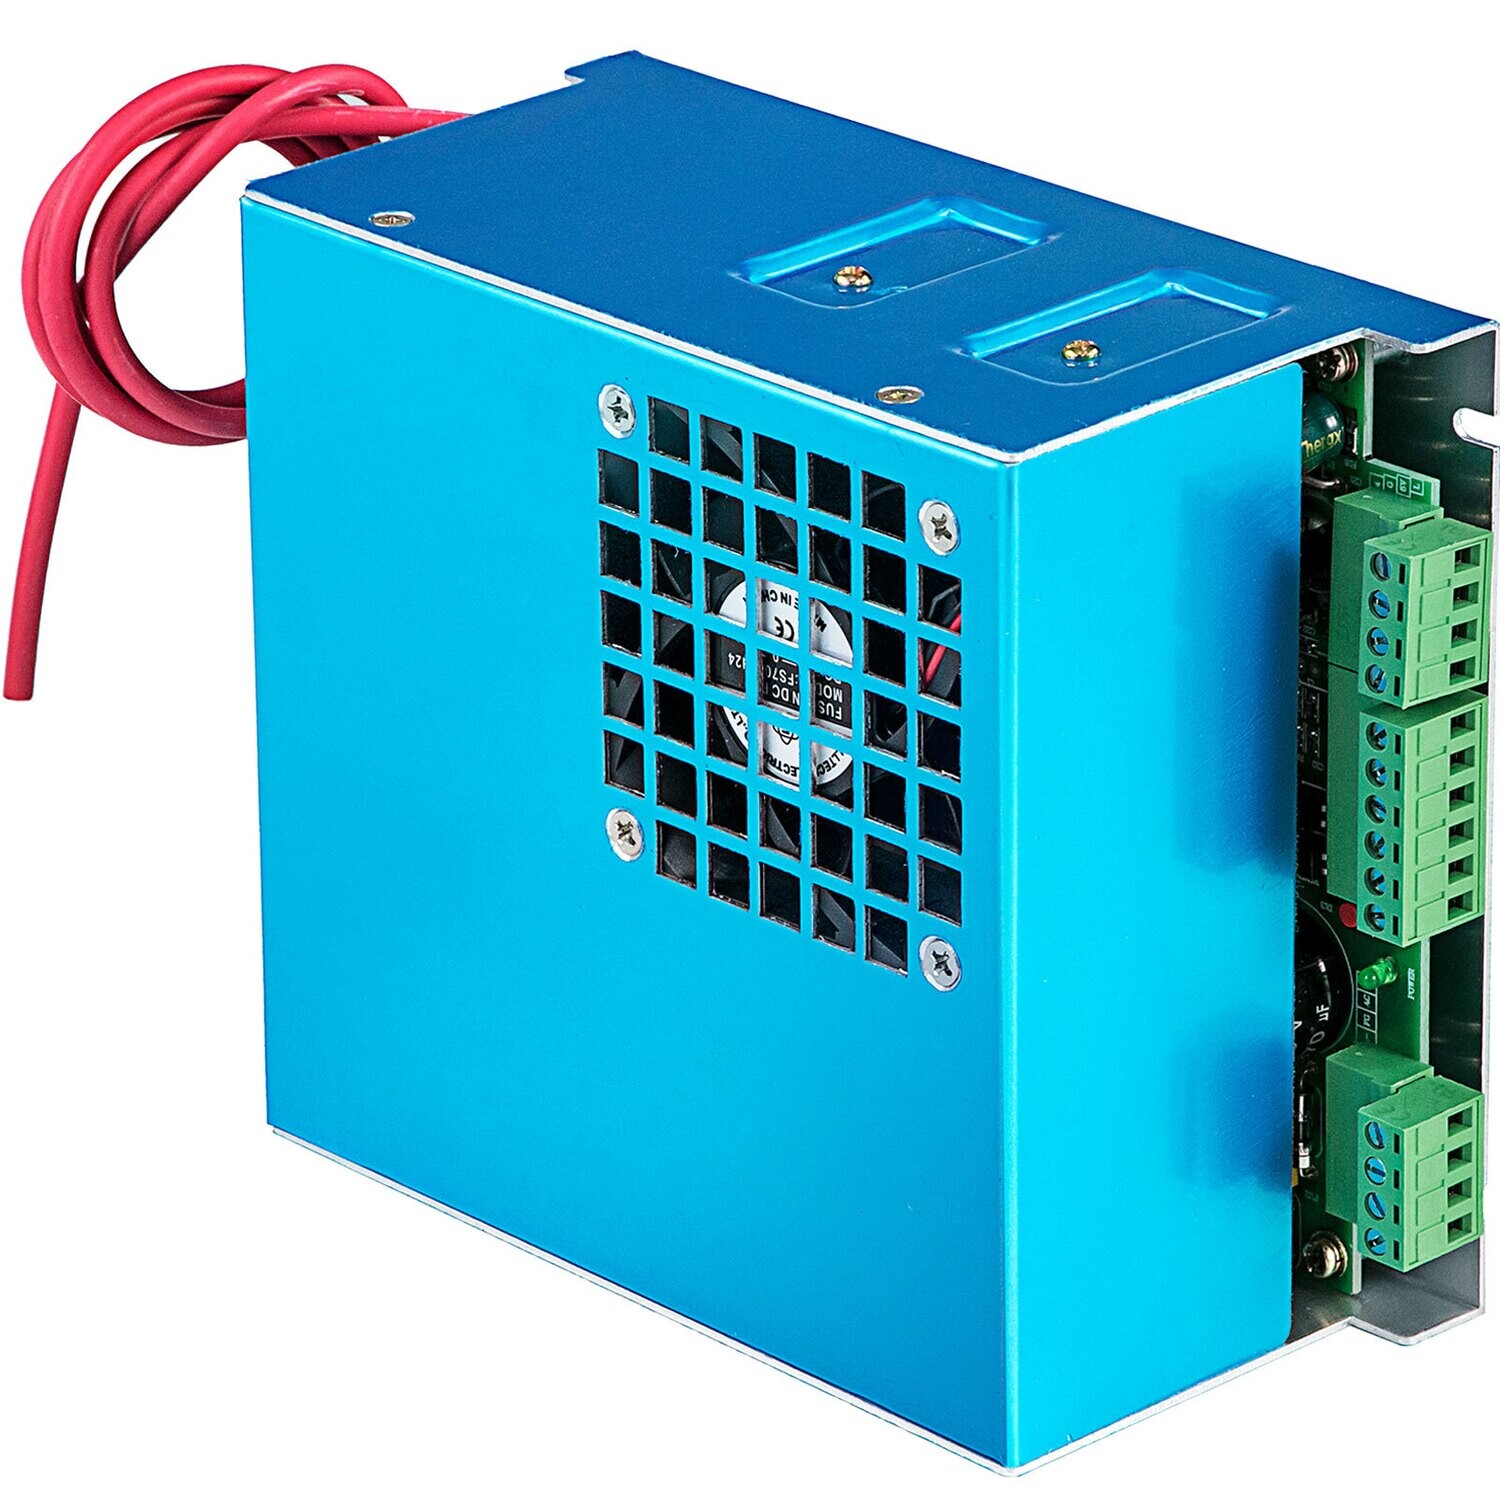 Co2 50w laser power supply for laser engraving and cutting machines